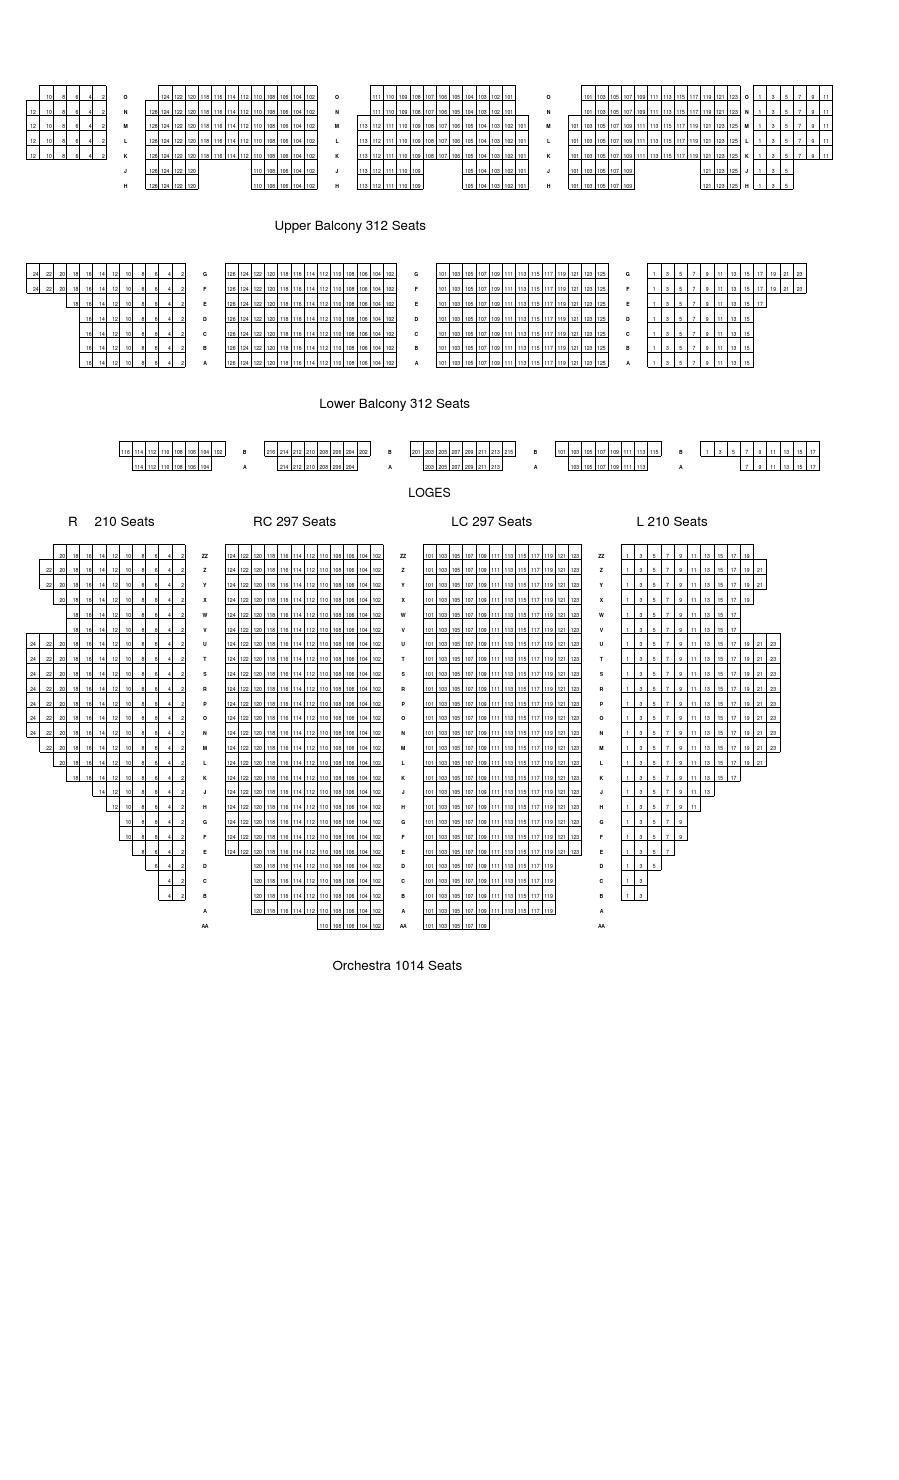 Tivoli Theatre seating map by ChattOnStage issuu